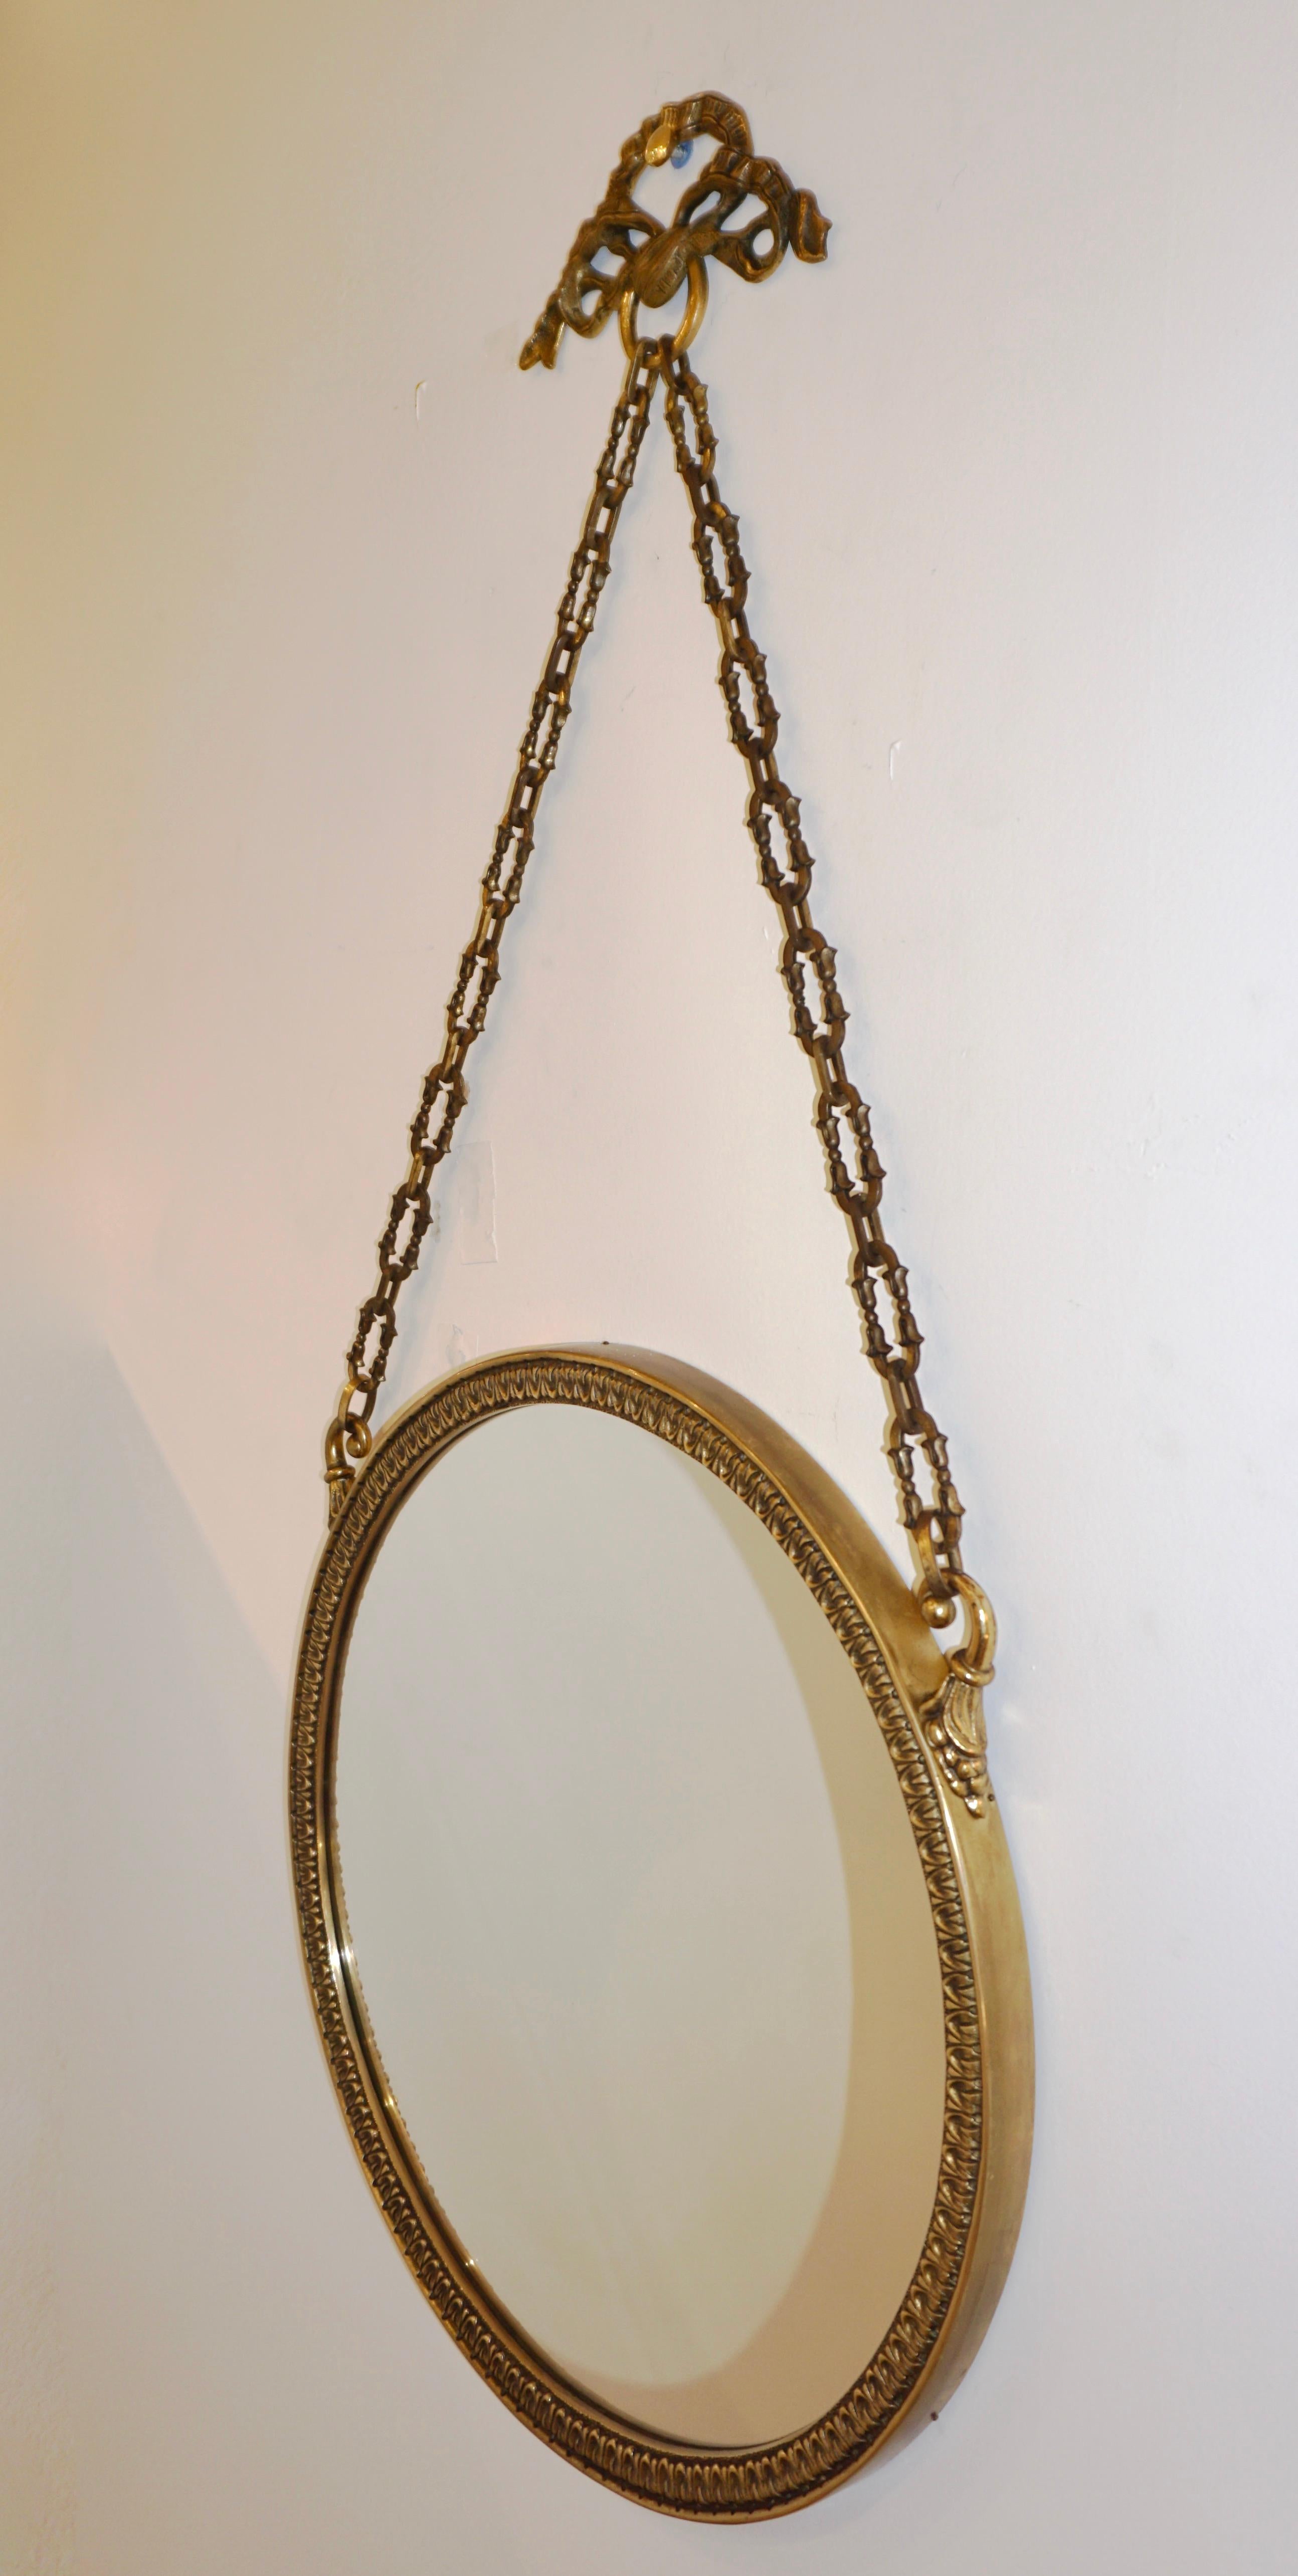 1950s Vintage Italian Chain Hanging & Chased Bronze Round Mirror with Knot 2